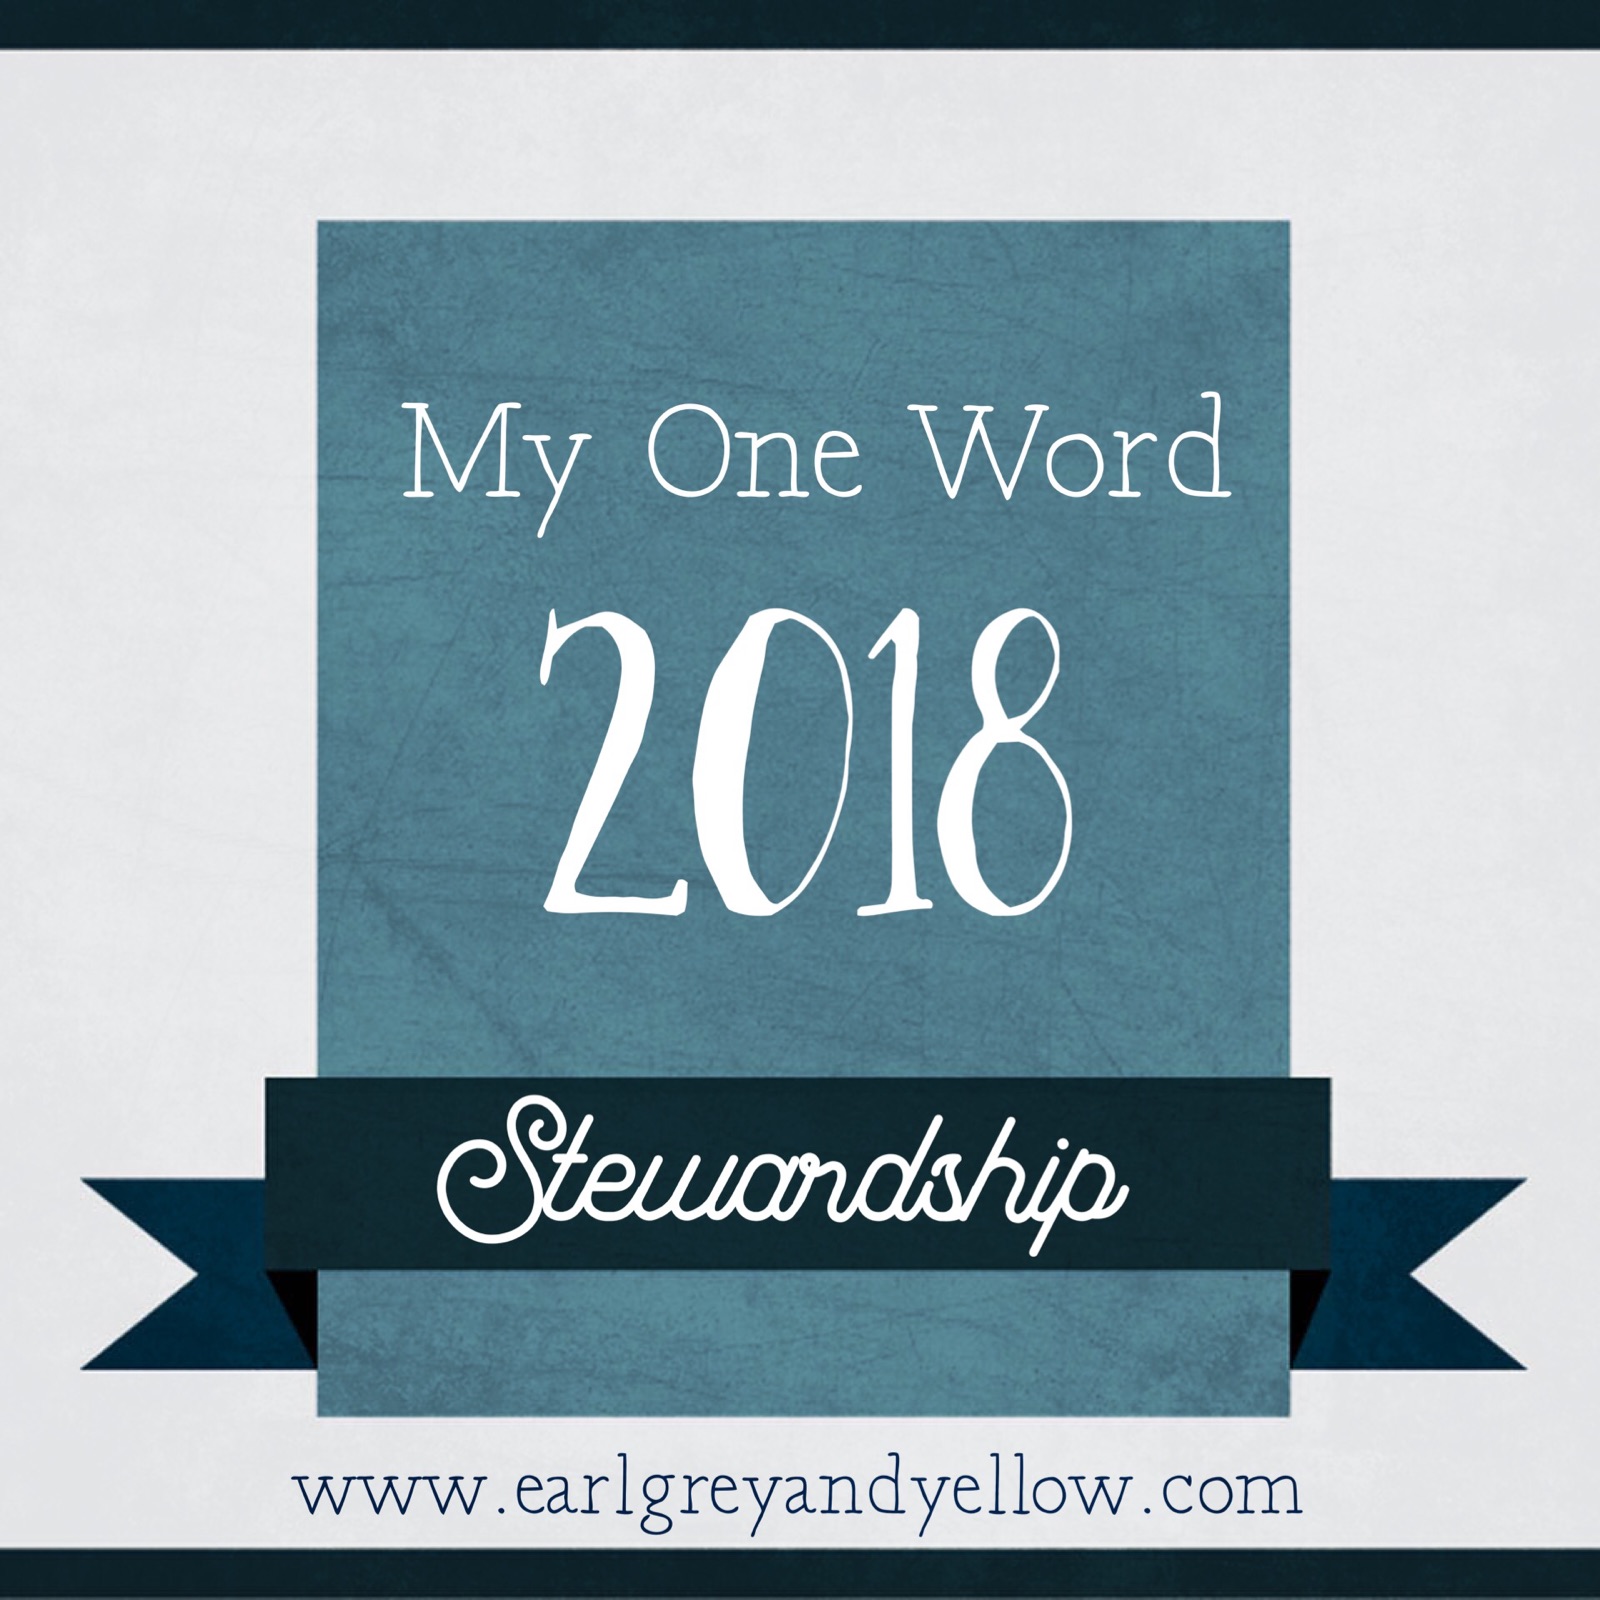 My One Word 2018